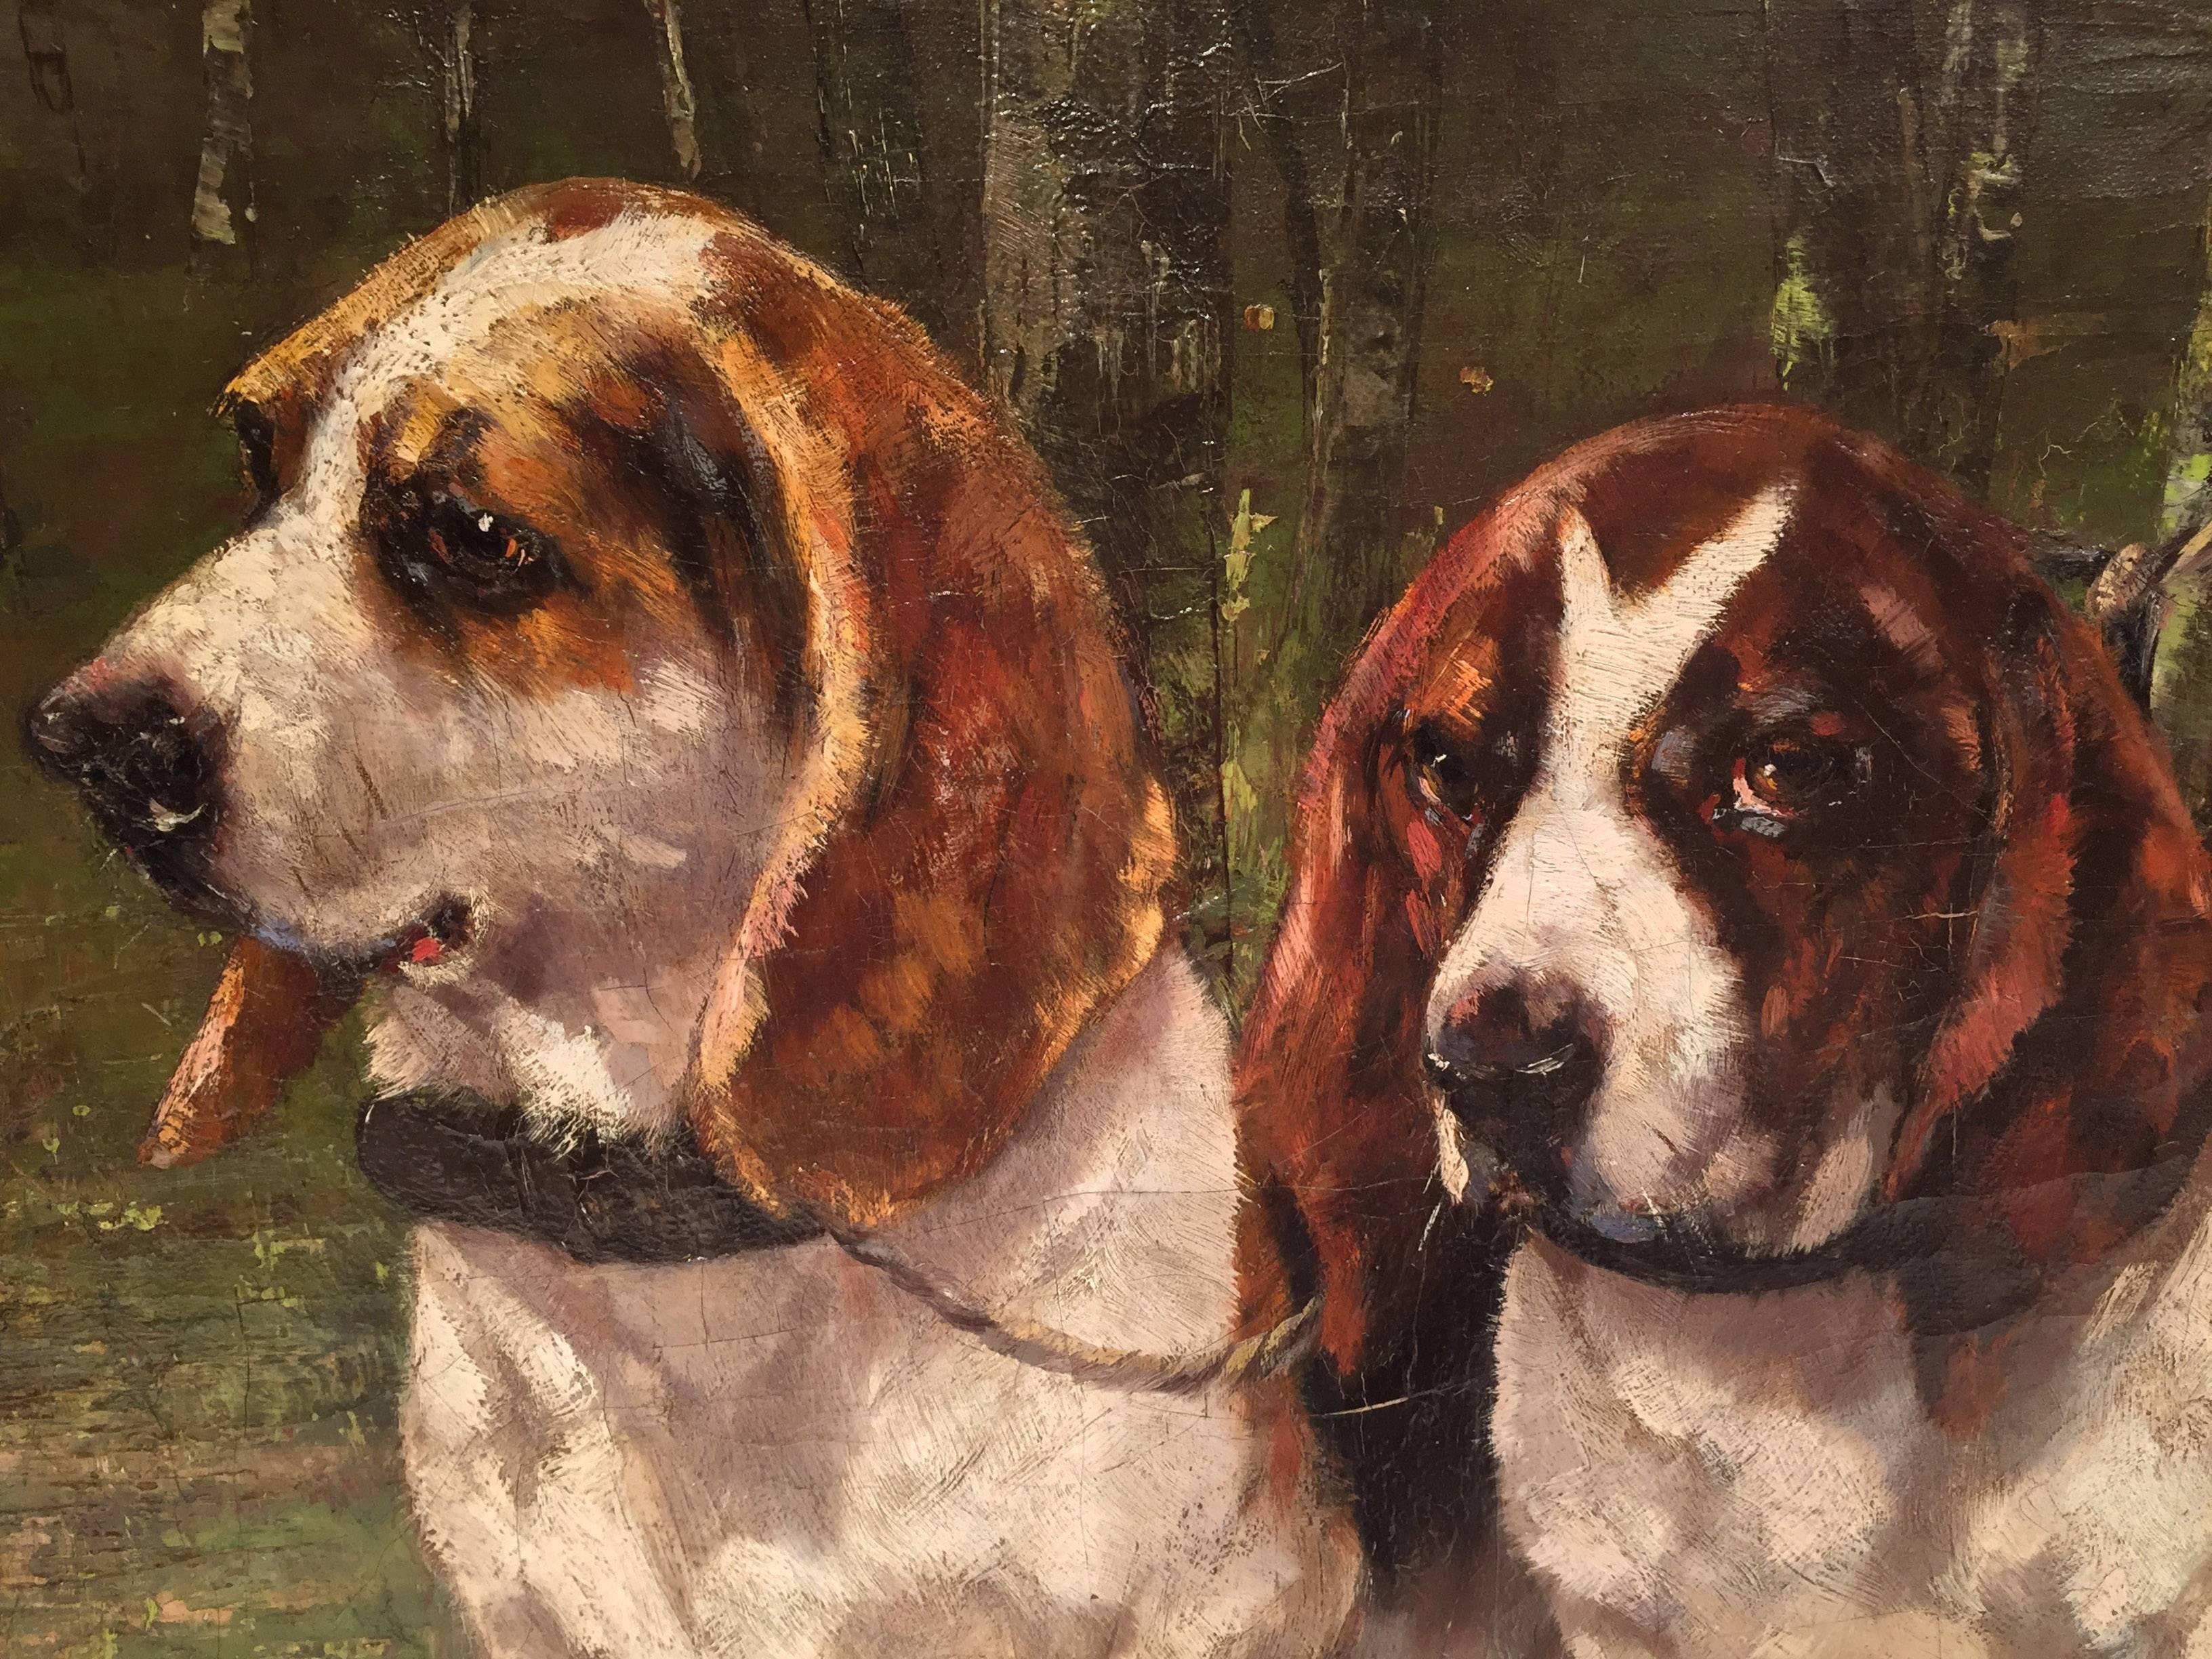 Fine 19th century oil on canvas painting depicting a pair of basset hound dogs. The painting is signed by Edmond Van Der Meulen (1841-1905).
Double frames giving dimension and depth to the painting with original plaque stating his name and the